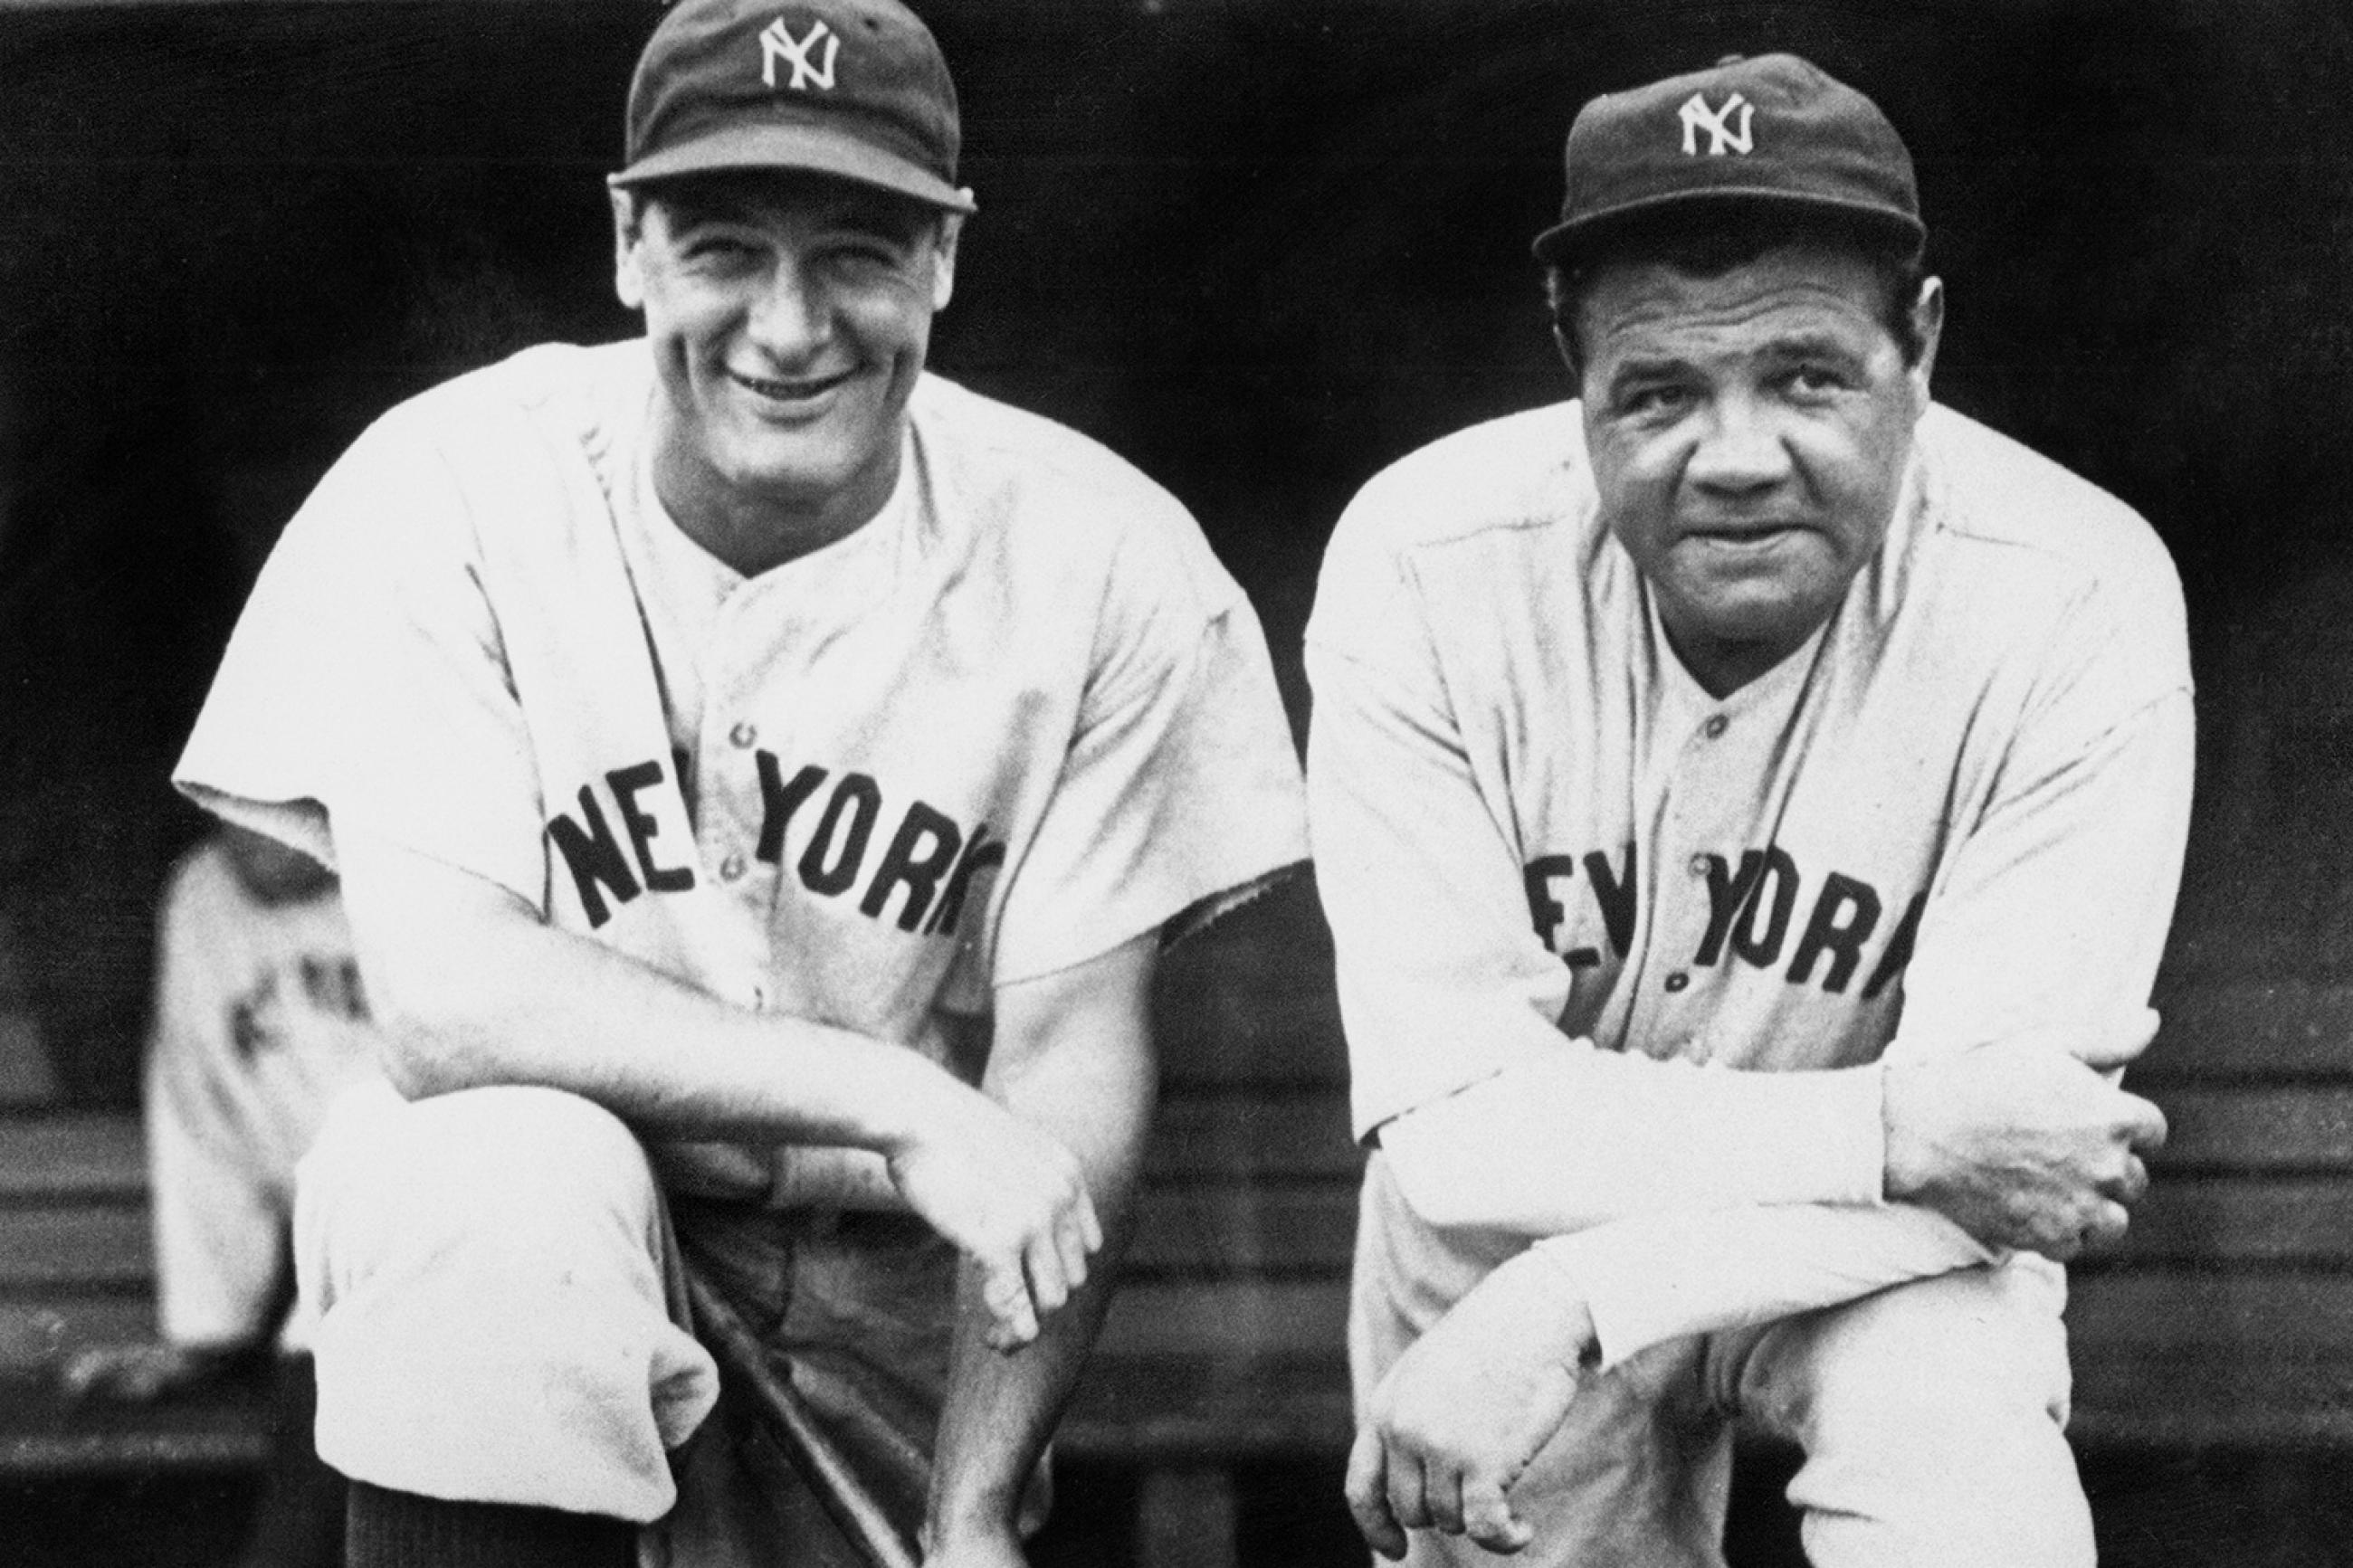 Lou Gehrig, pictured with New York Yankees teammate Babe Ruth, was called the "Iron Horse" of baseball for playing in 2,130 consecutive games before his forced retirement from the game that loved him. The photo shows Lou Gherig in happier times leaning on one knee propped on a dugout bench next to the Babe. GETTY PHOTO.